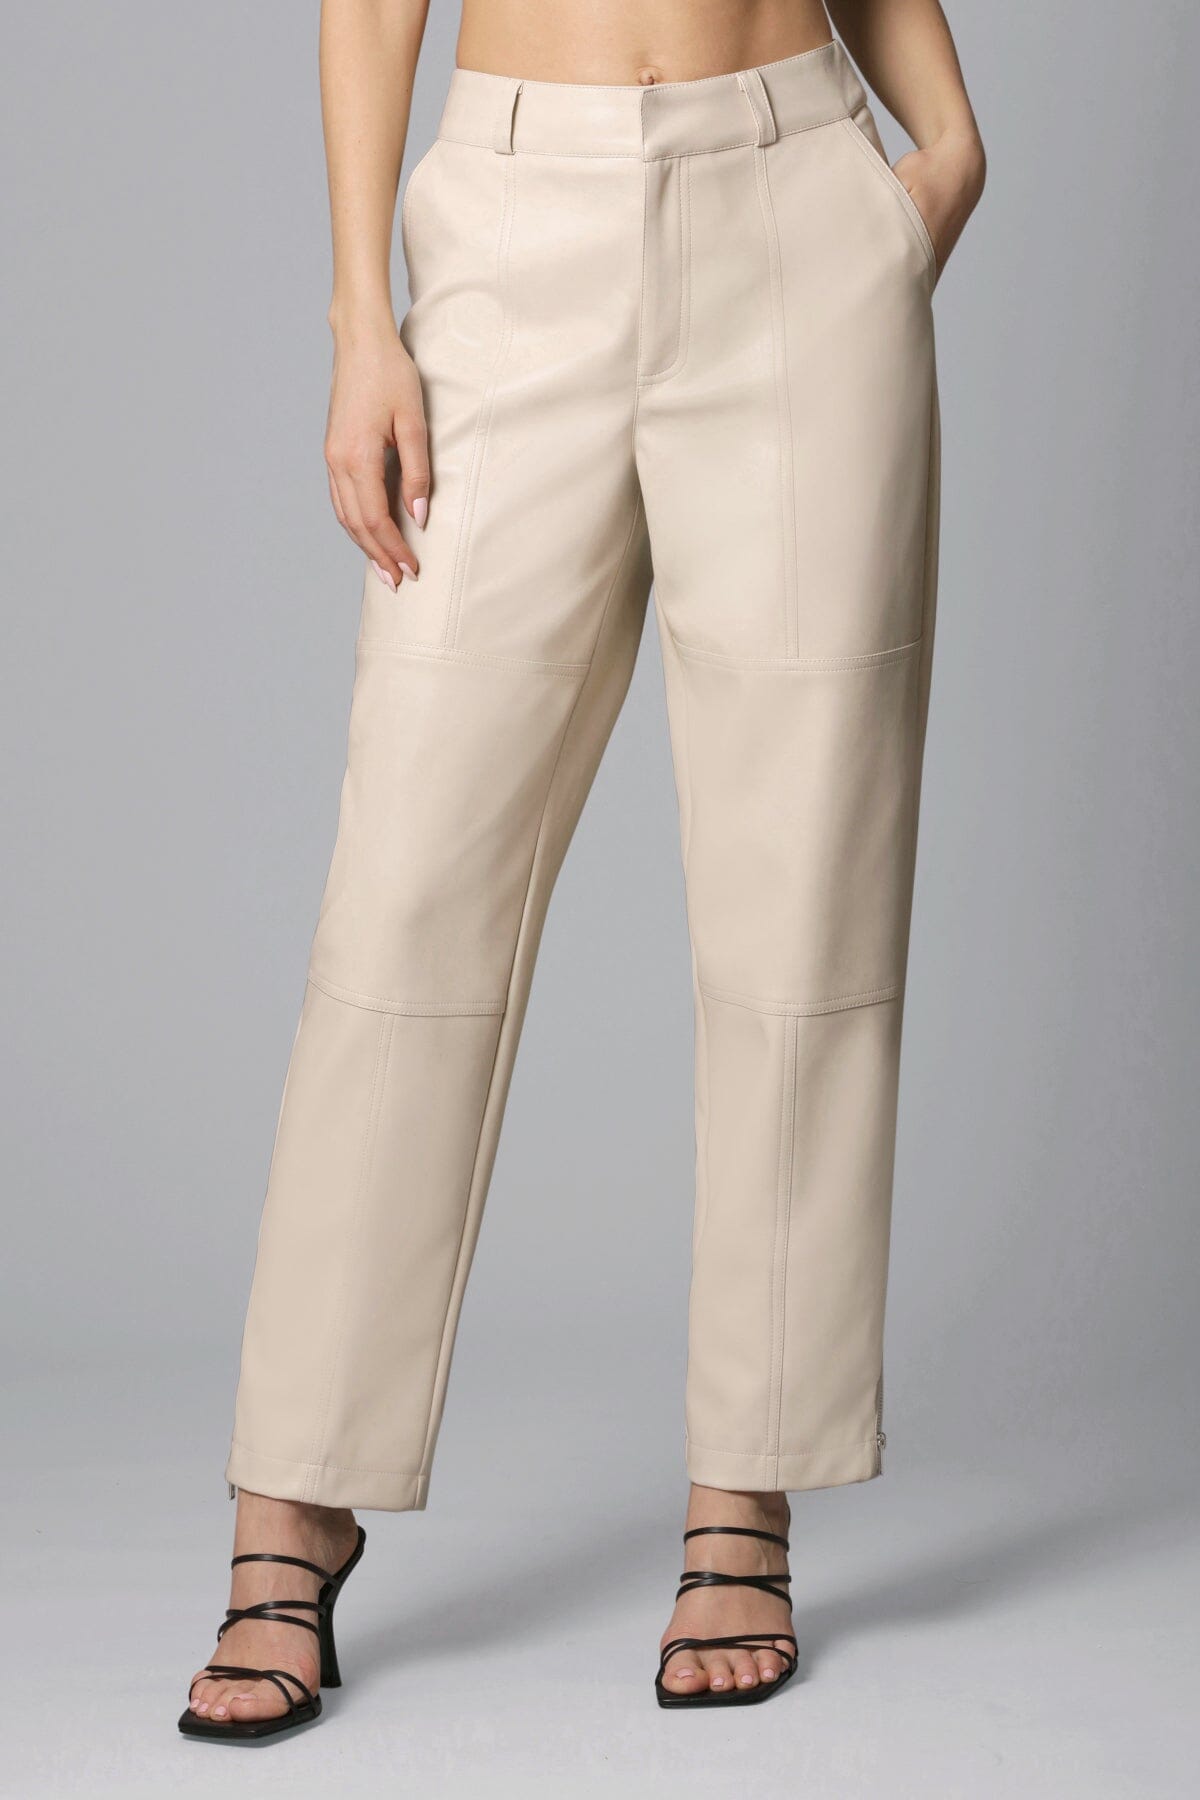 bone beige off white faux ever leather tapered pant - women's figure flattering work appropriate pants 